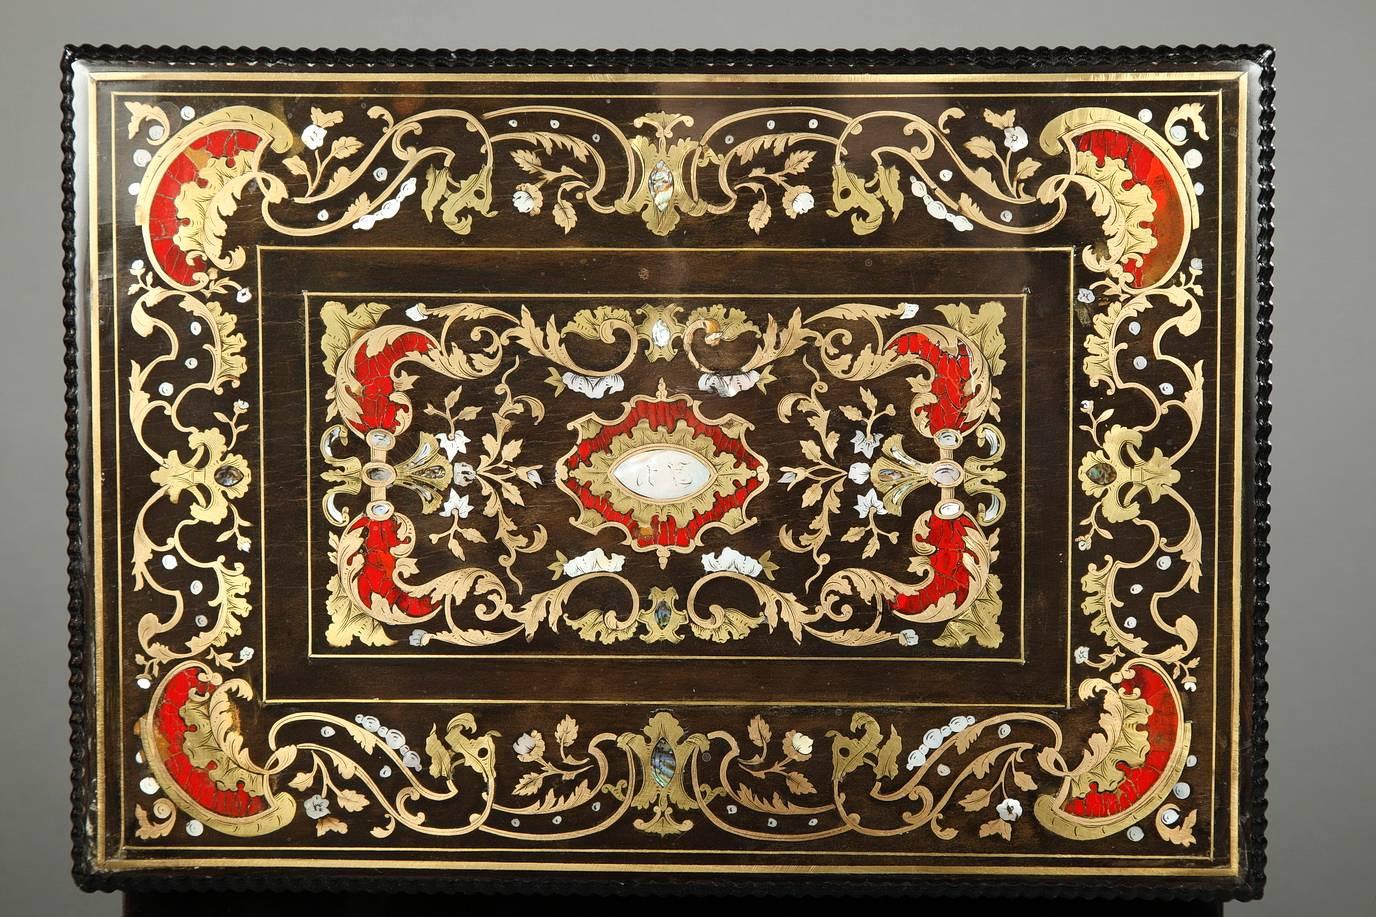 Napoleon III Mid-19th Century Wooden Coffer Inlaid with Mother-of-Pearl For Sale